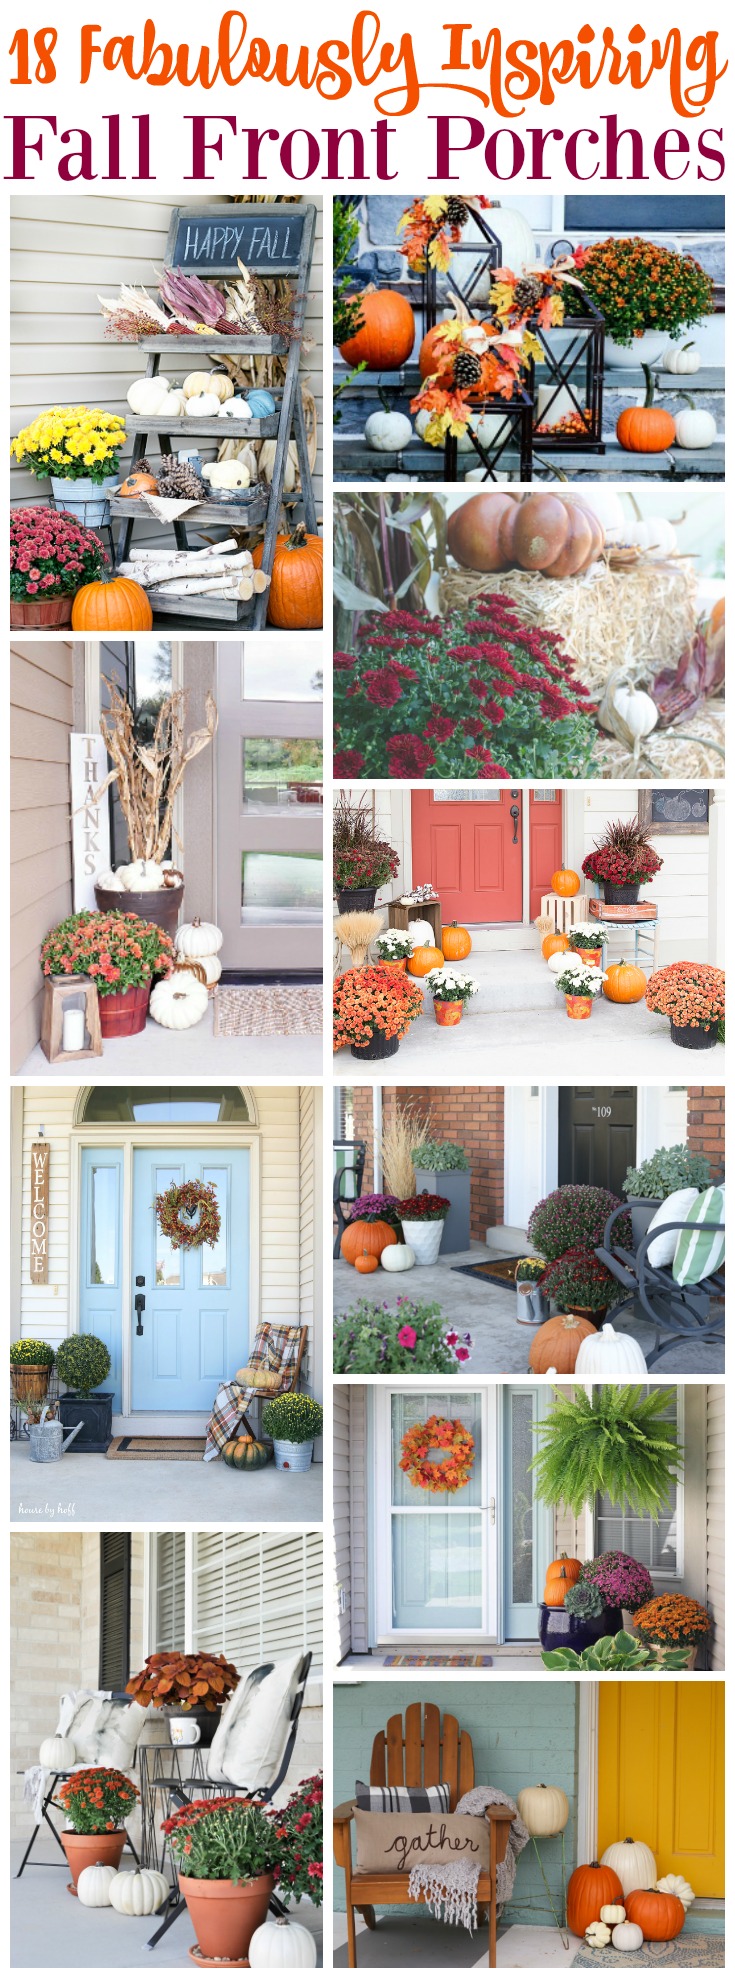 you-wont-want-to-miss-these-18-fabulously-inspiring-fall-front-porches